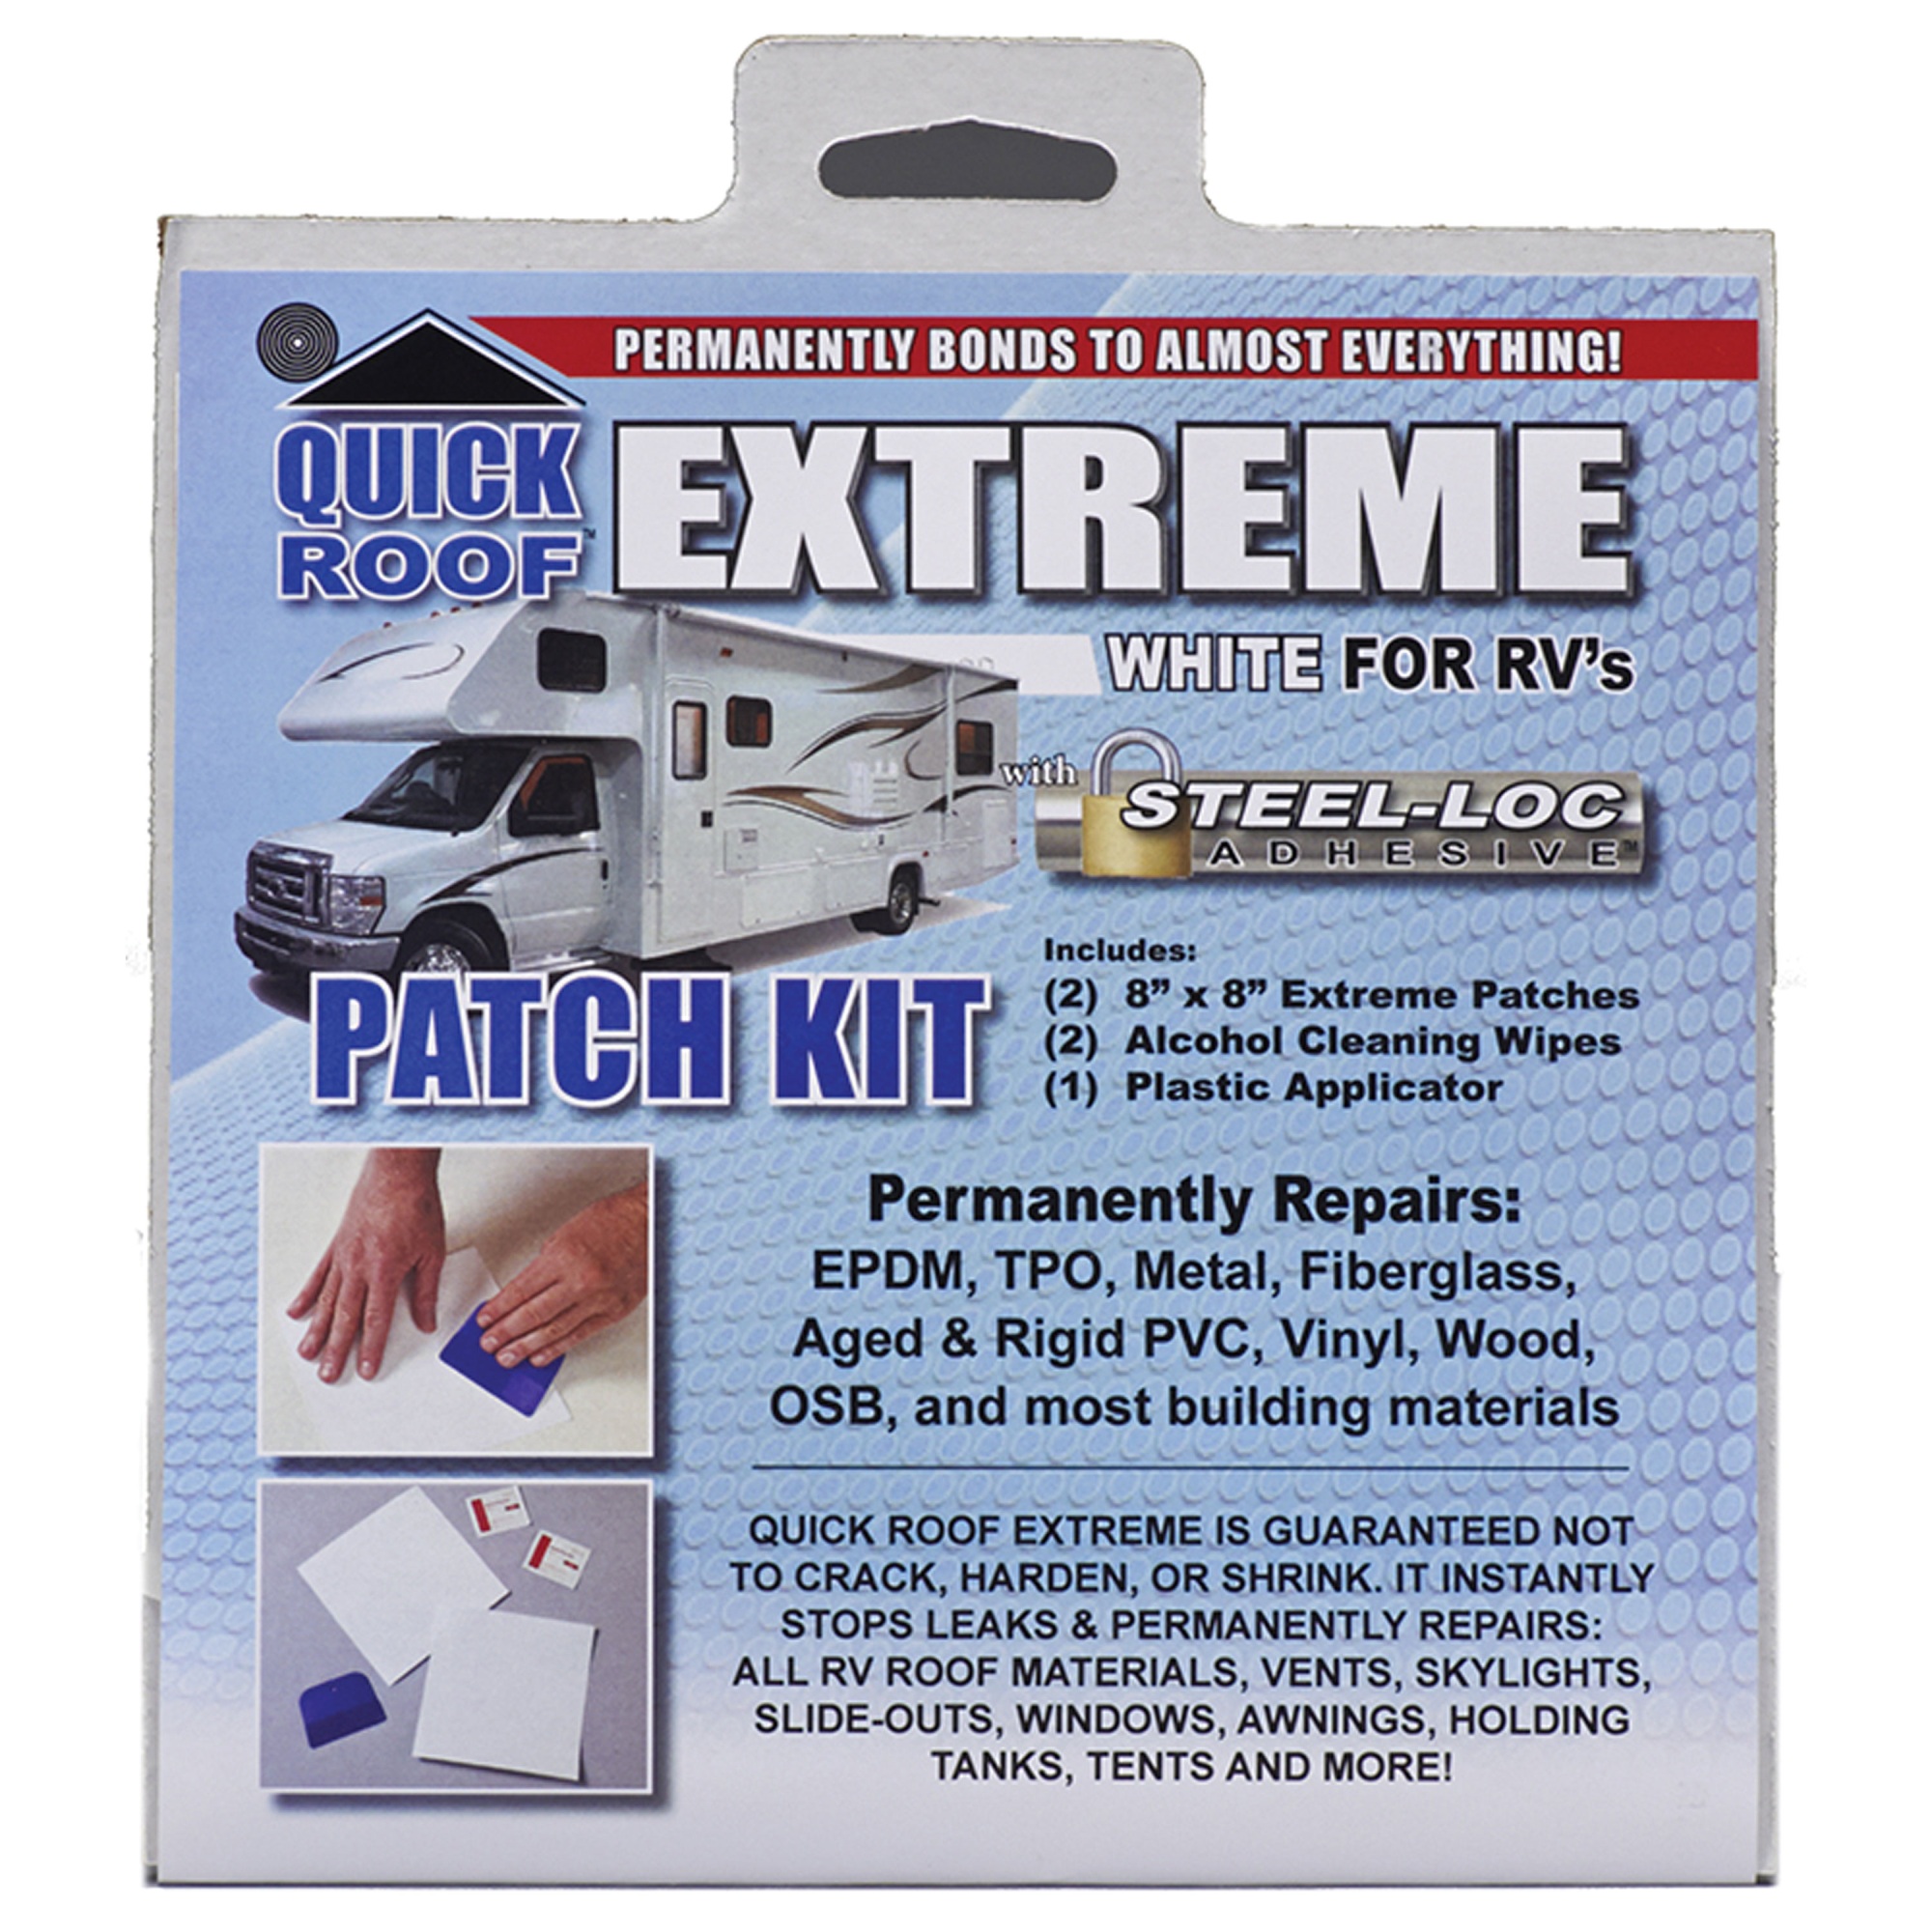 Cofair Products UBE88 Quick Roof Extreme Patch Kit With Applicator - 8Inch x 8Inch